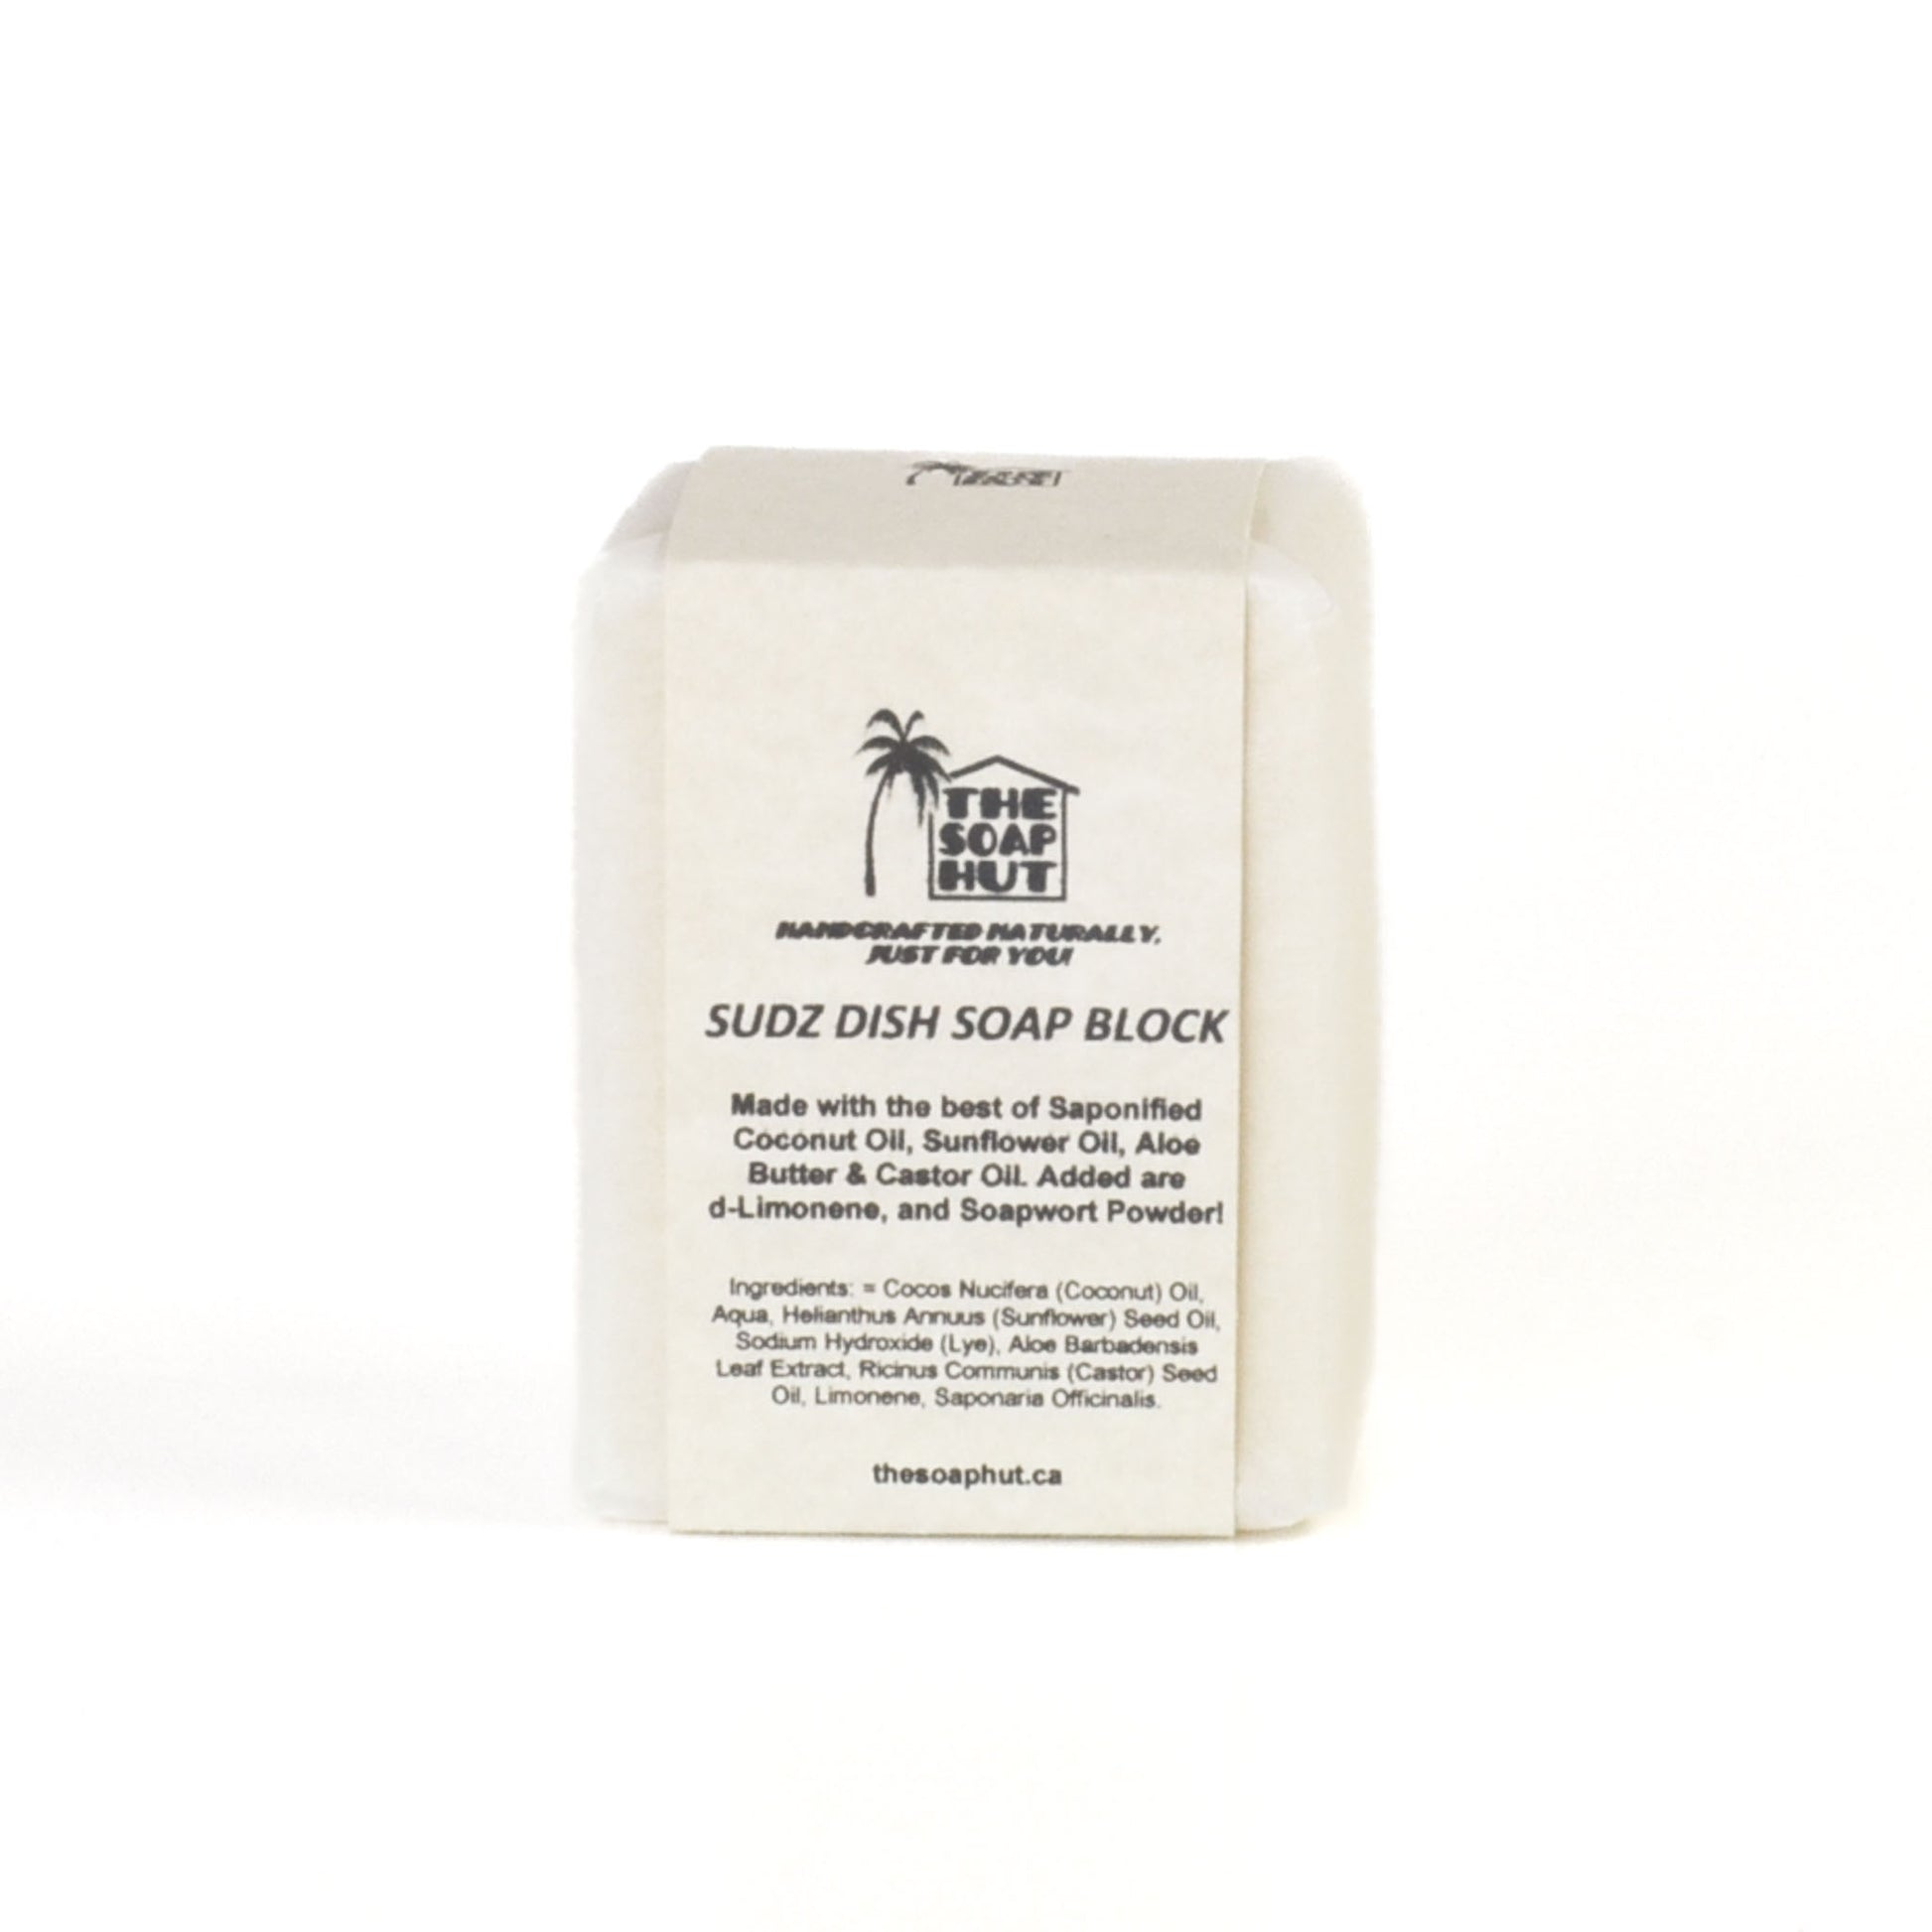 The best solid dish soap block. Made in Ontario Canada, all natural ingredients.